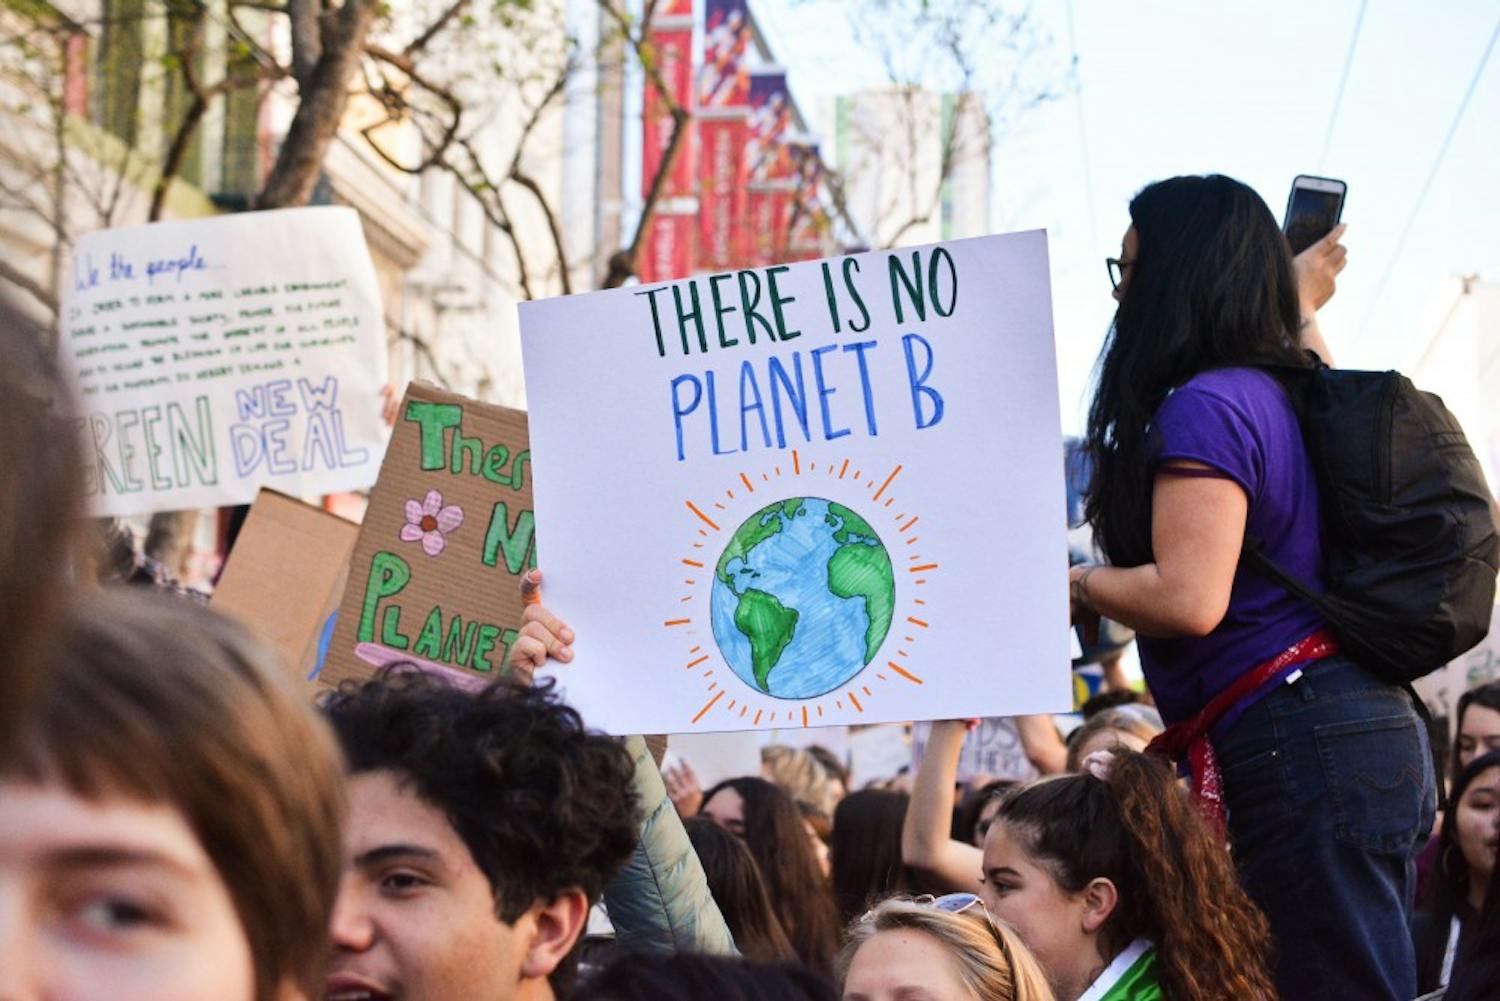 'There is no planet B' climate change activist sign